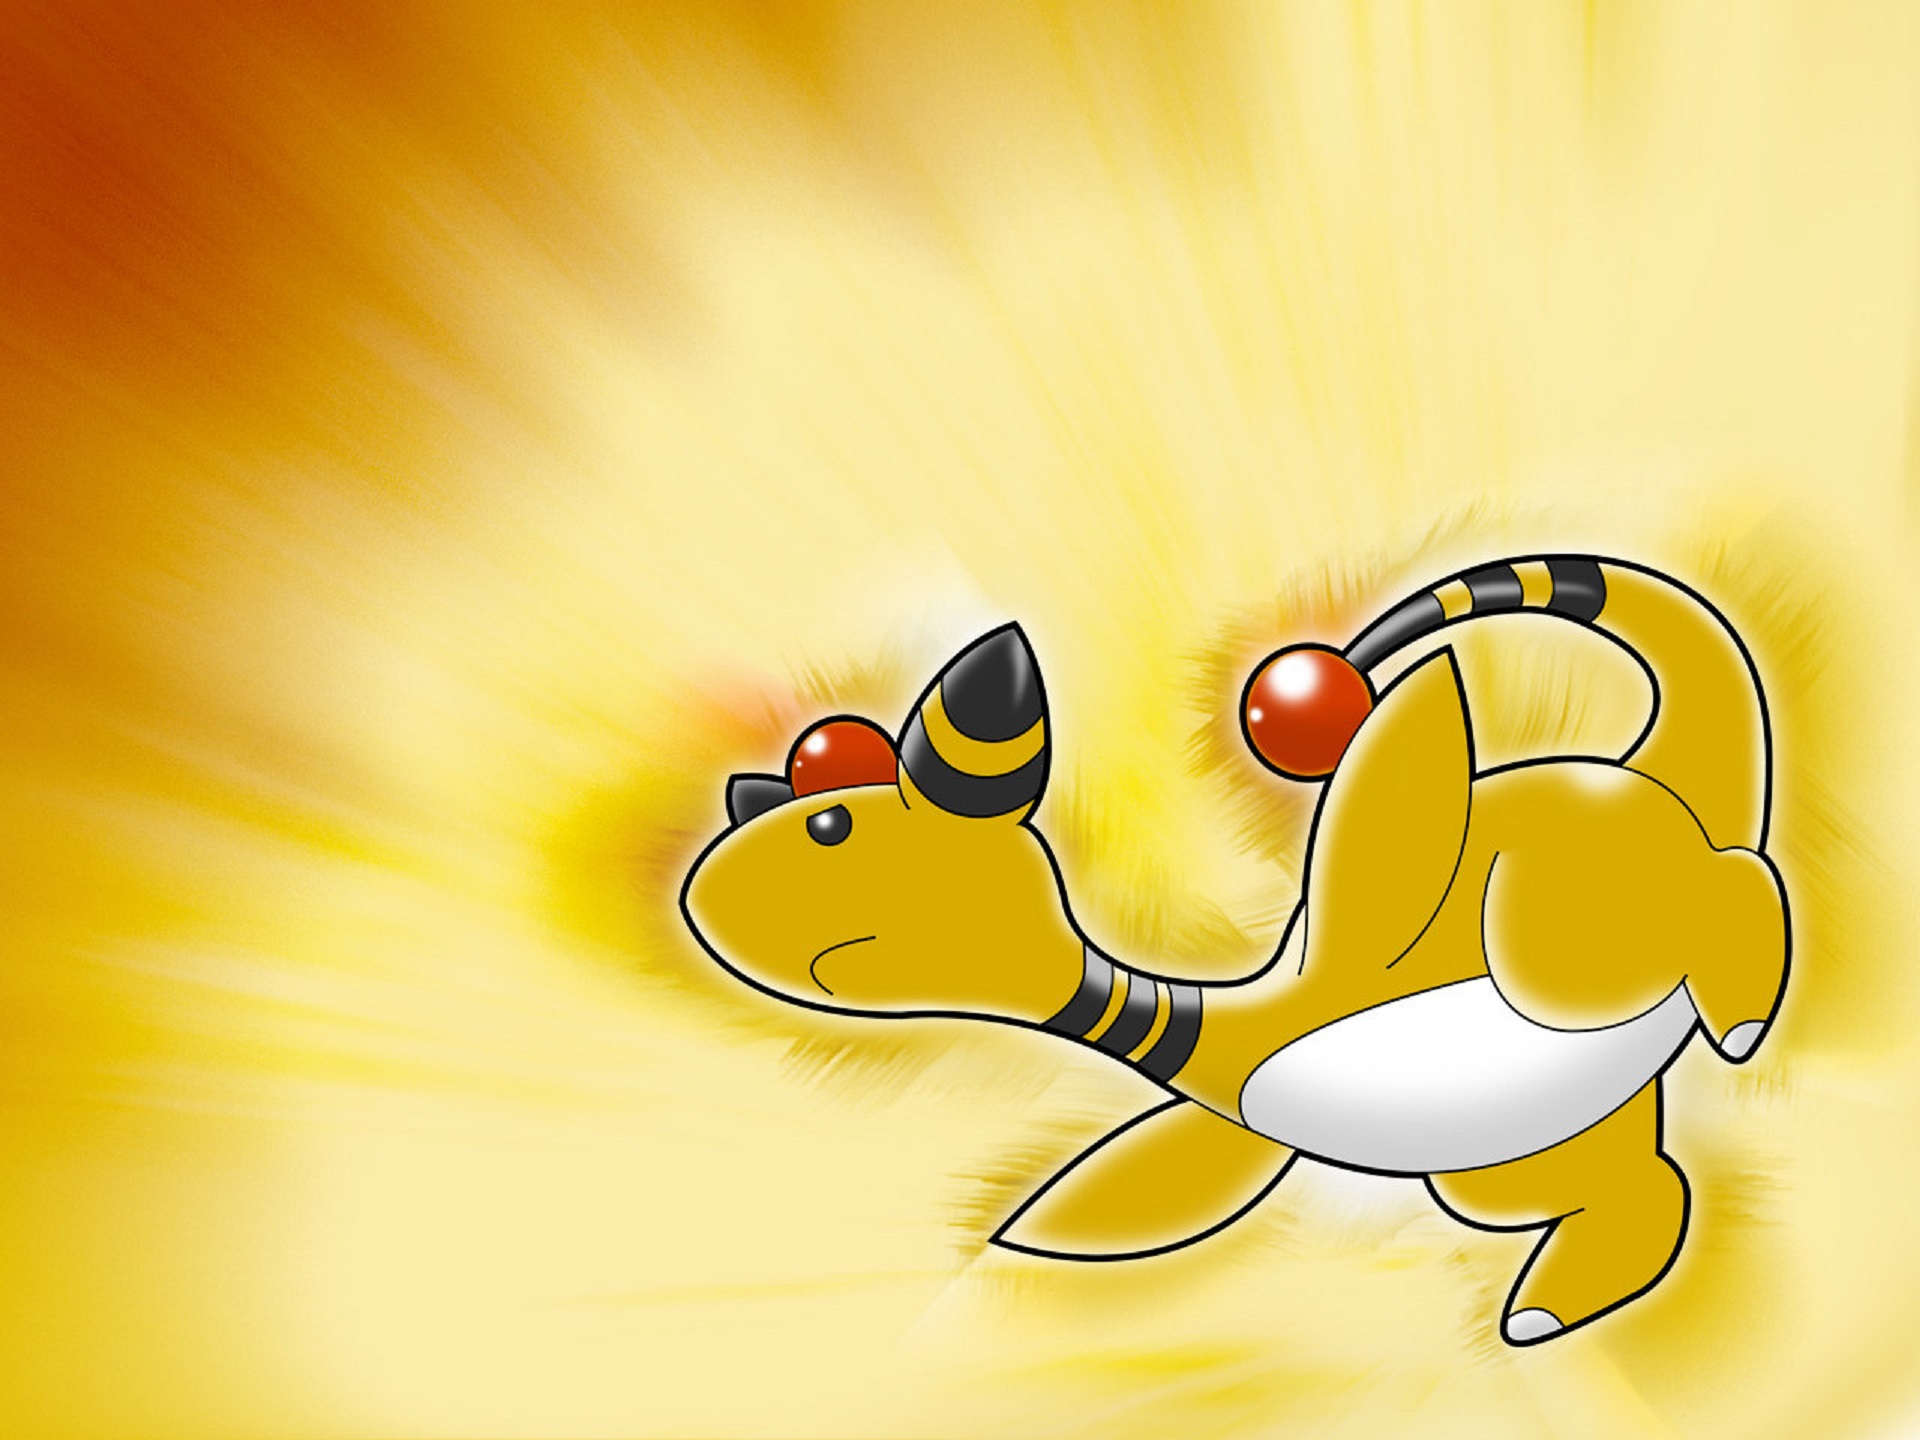 Ampharos Wallpaper Image Photos Pictures Background